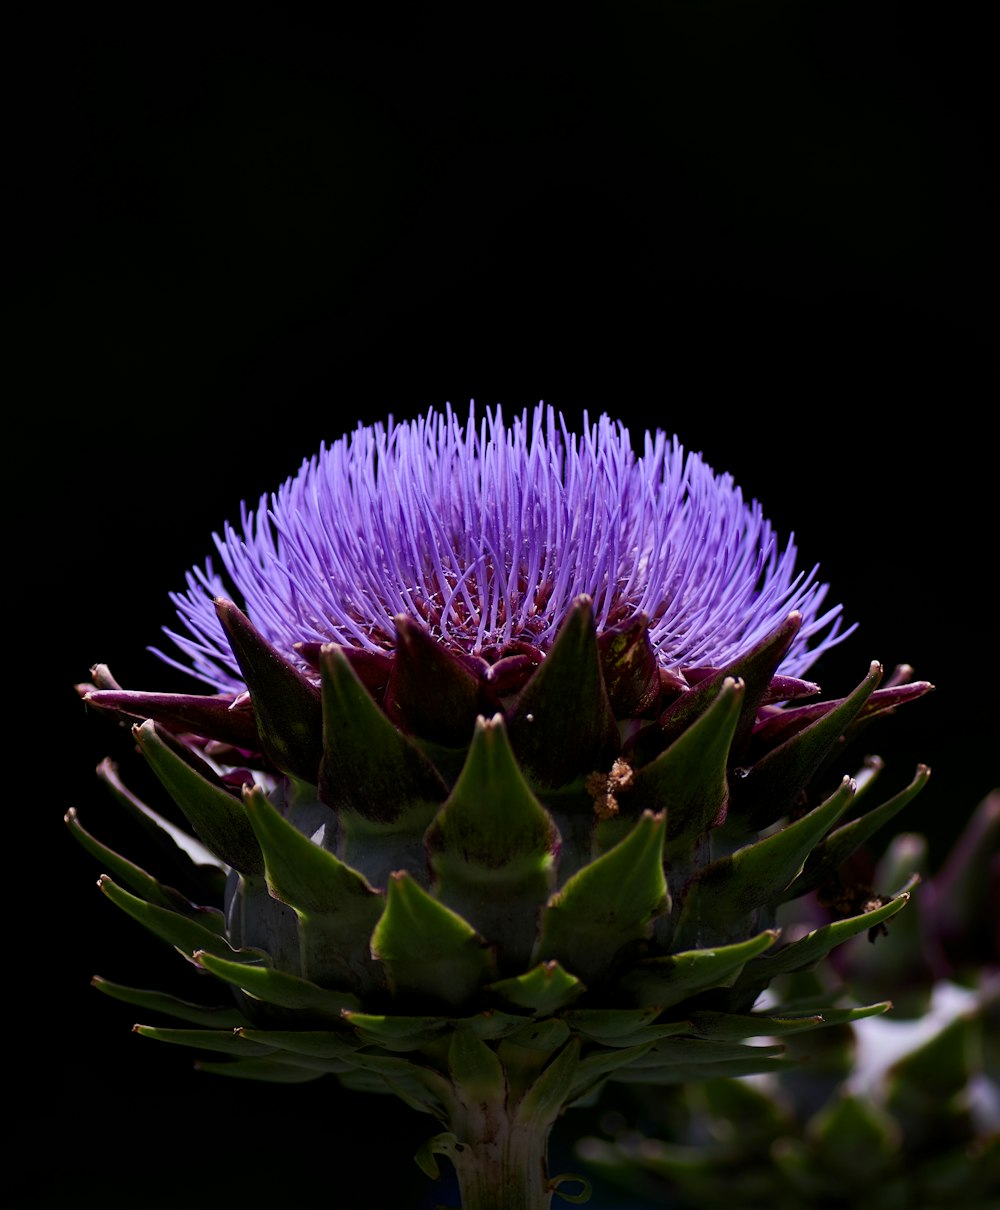 purple and green flower in black background